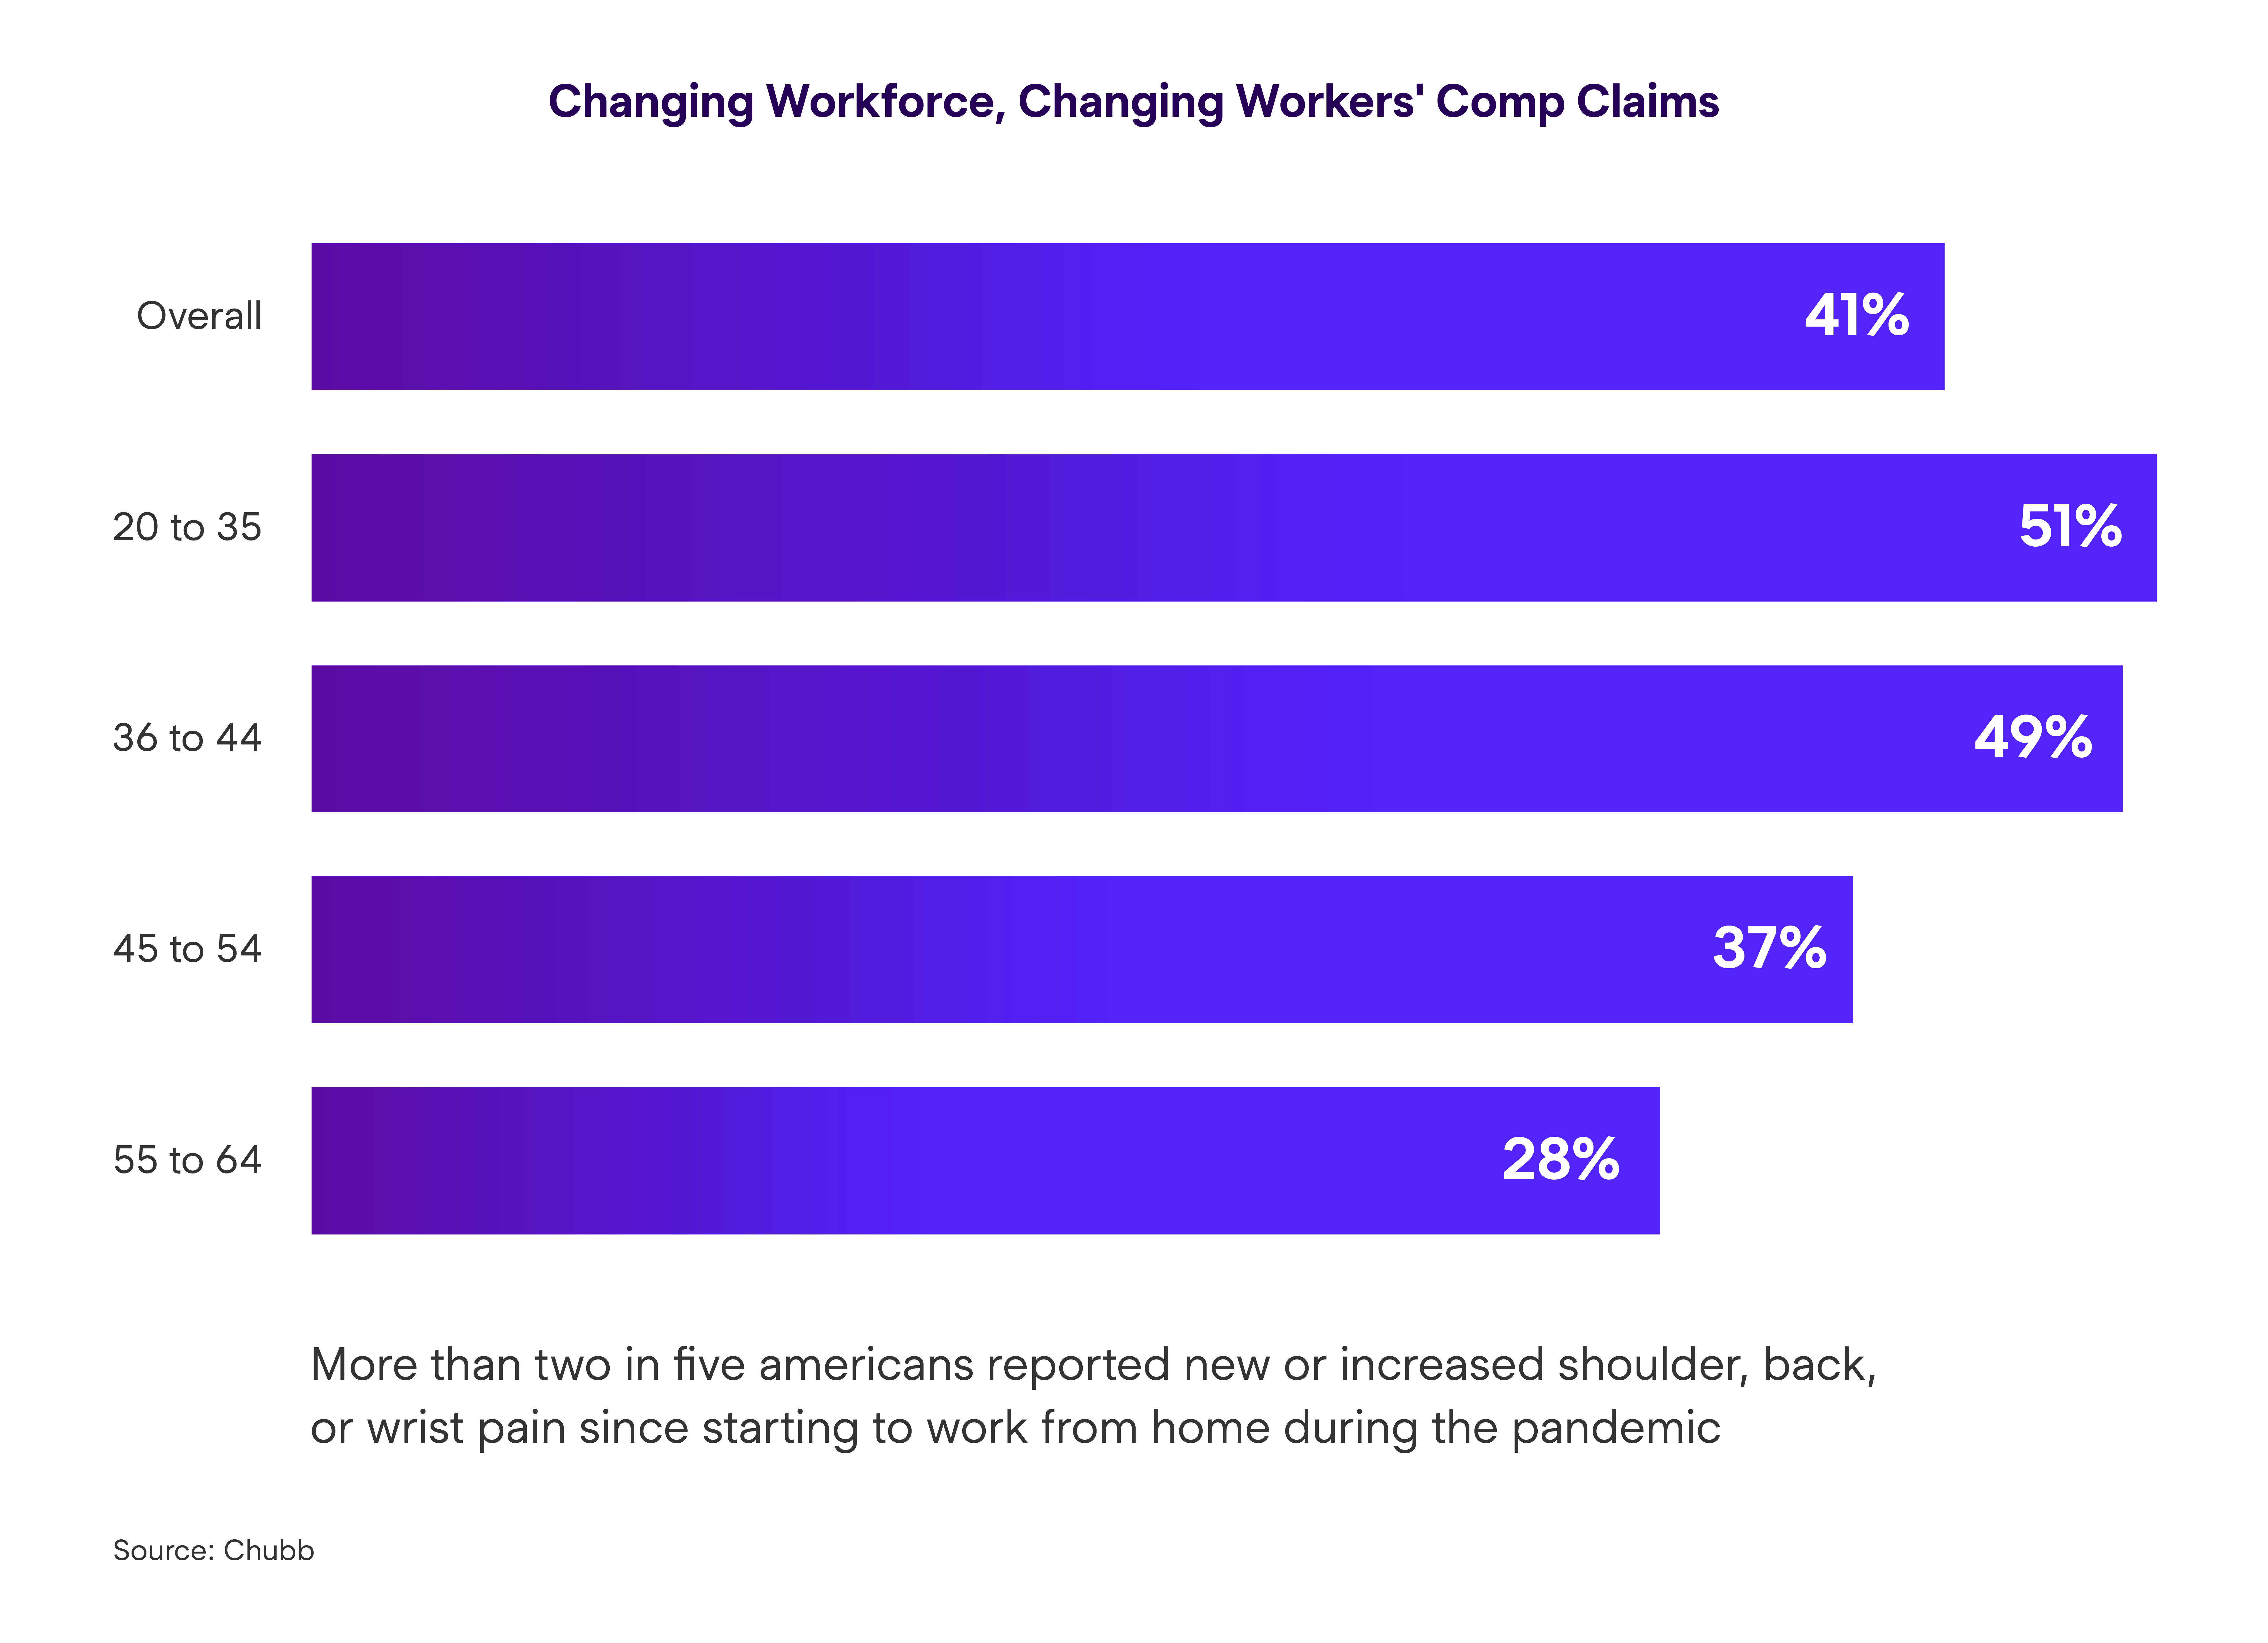 Changing Workforce and Work Comp Claims